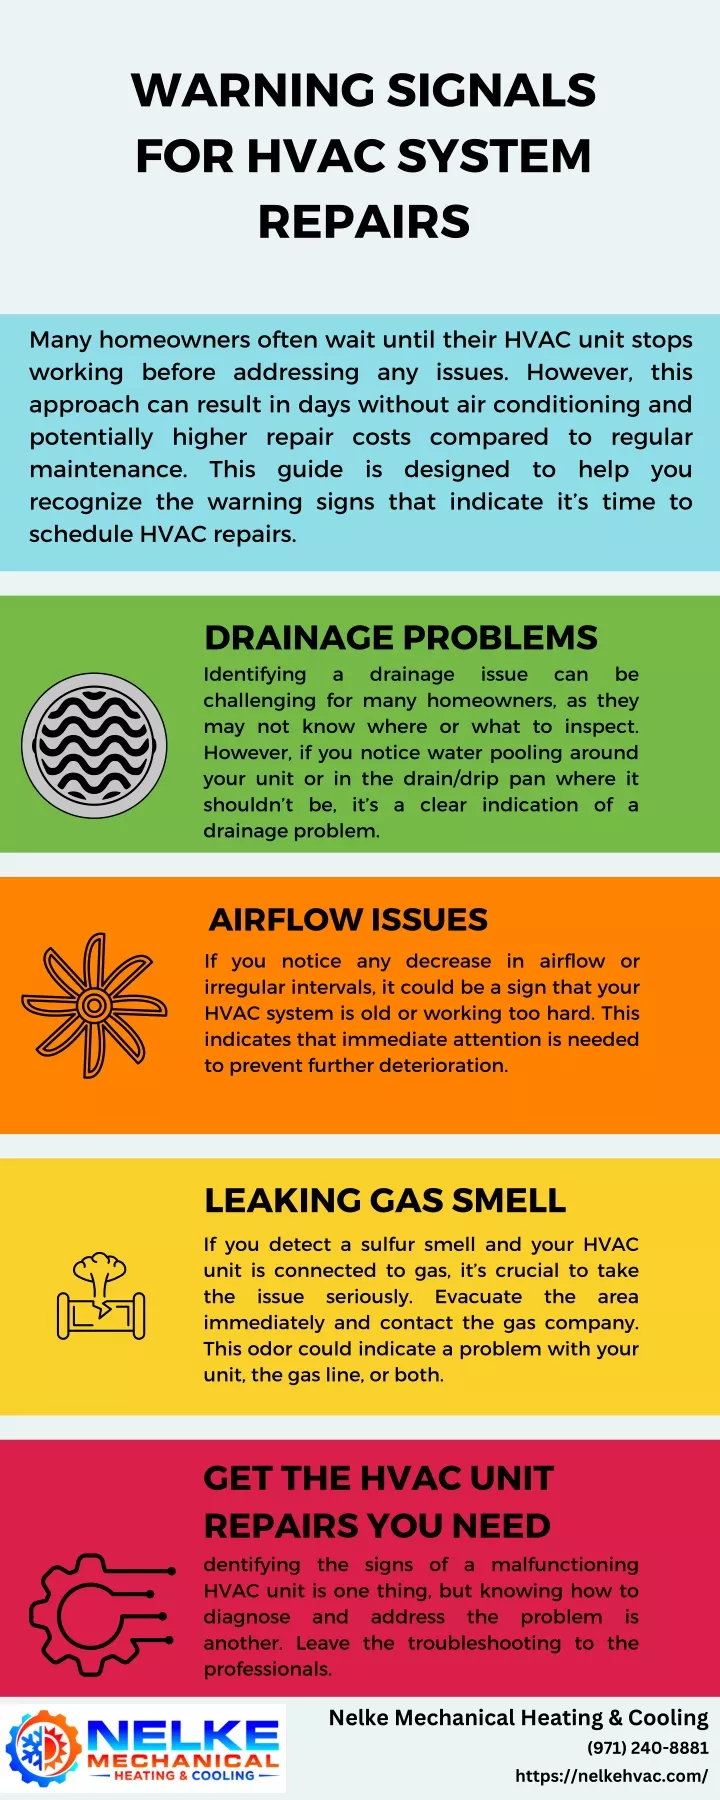 warning signals for hvac system repairs